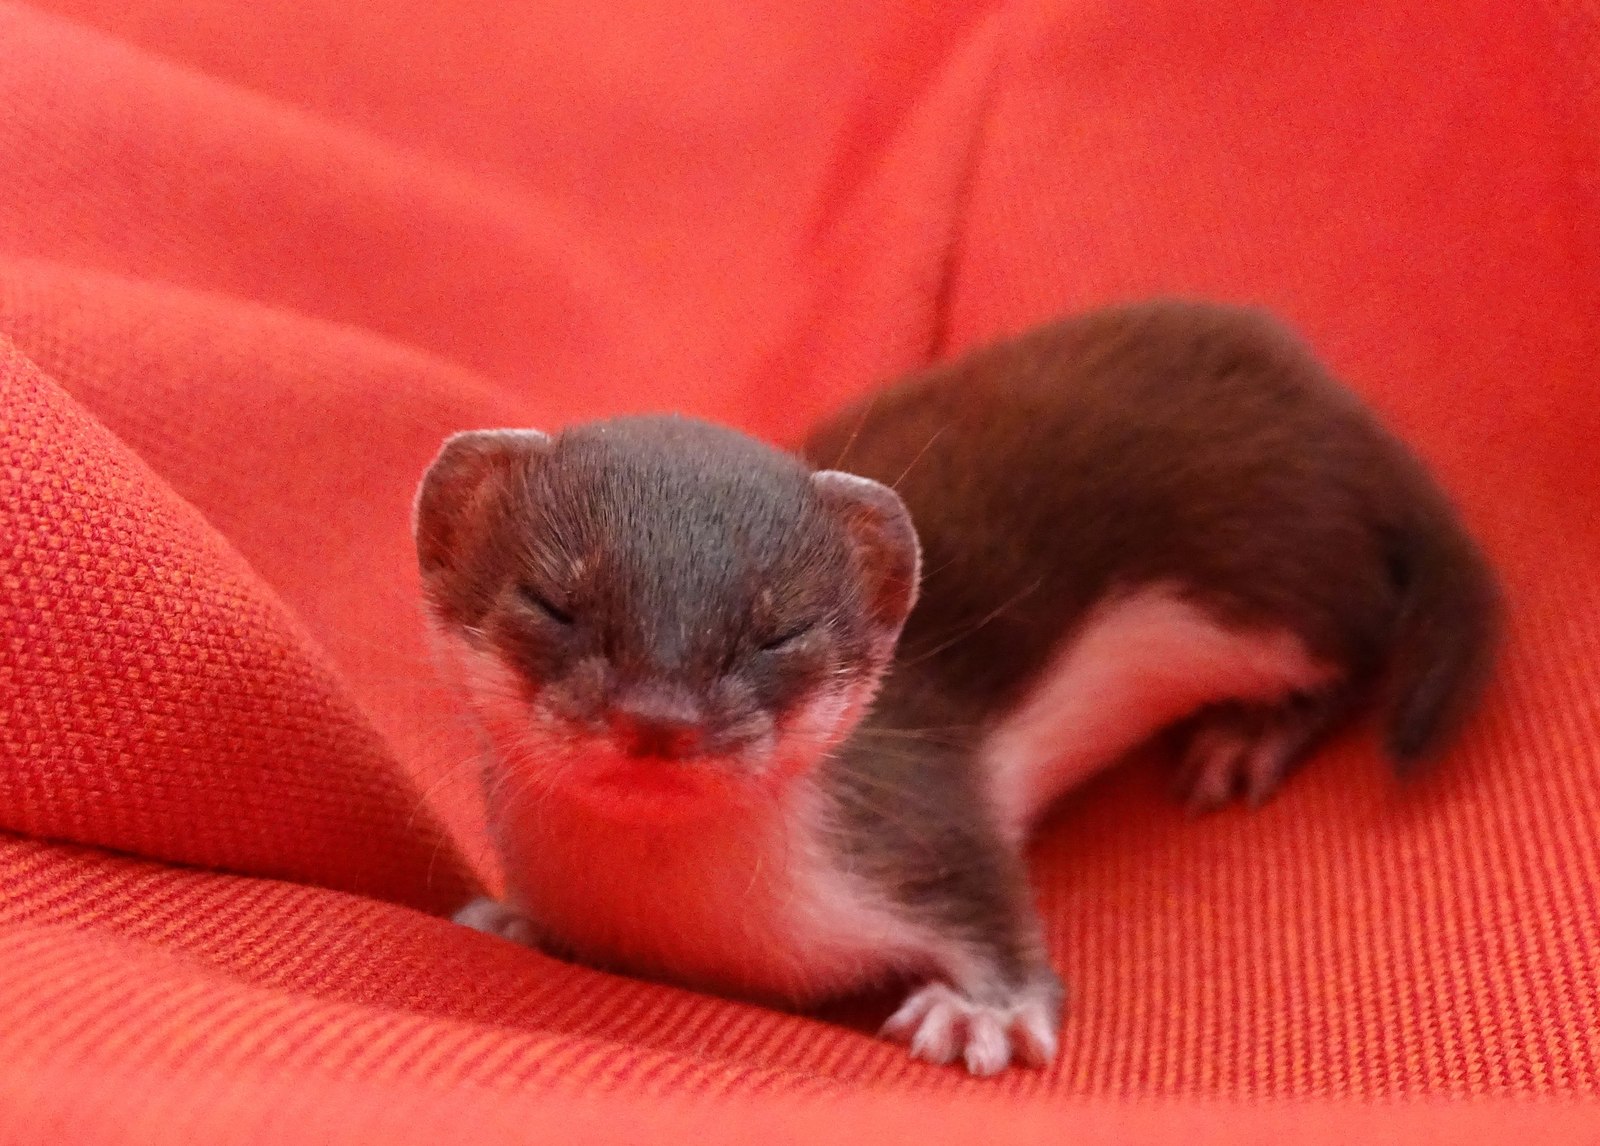 A little sweetness =) - Weasel, , , Animals, Photo, Pictures and photos, Images, The photo